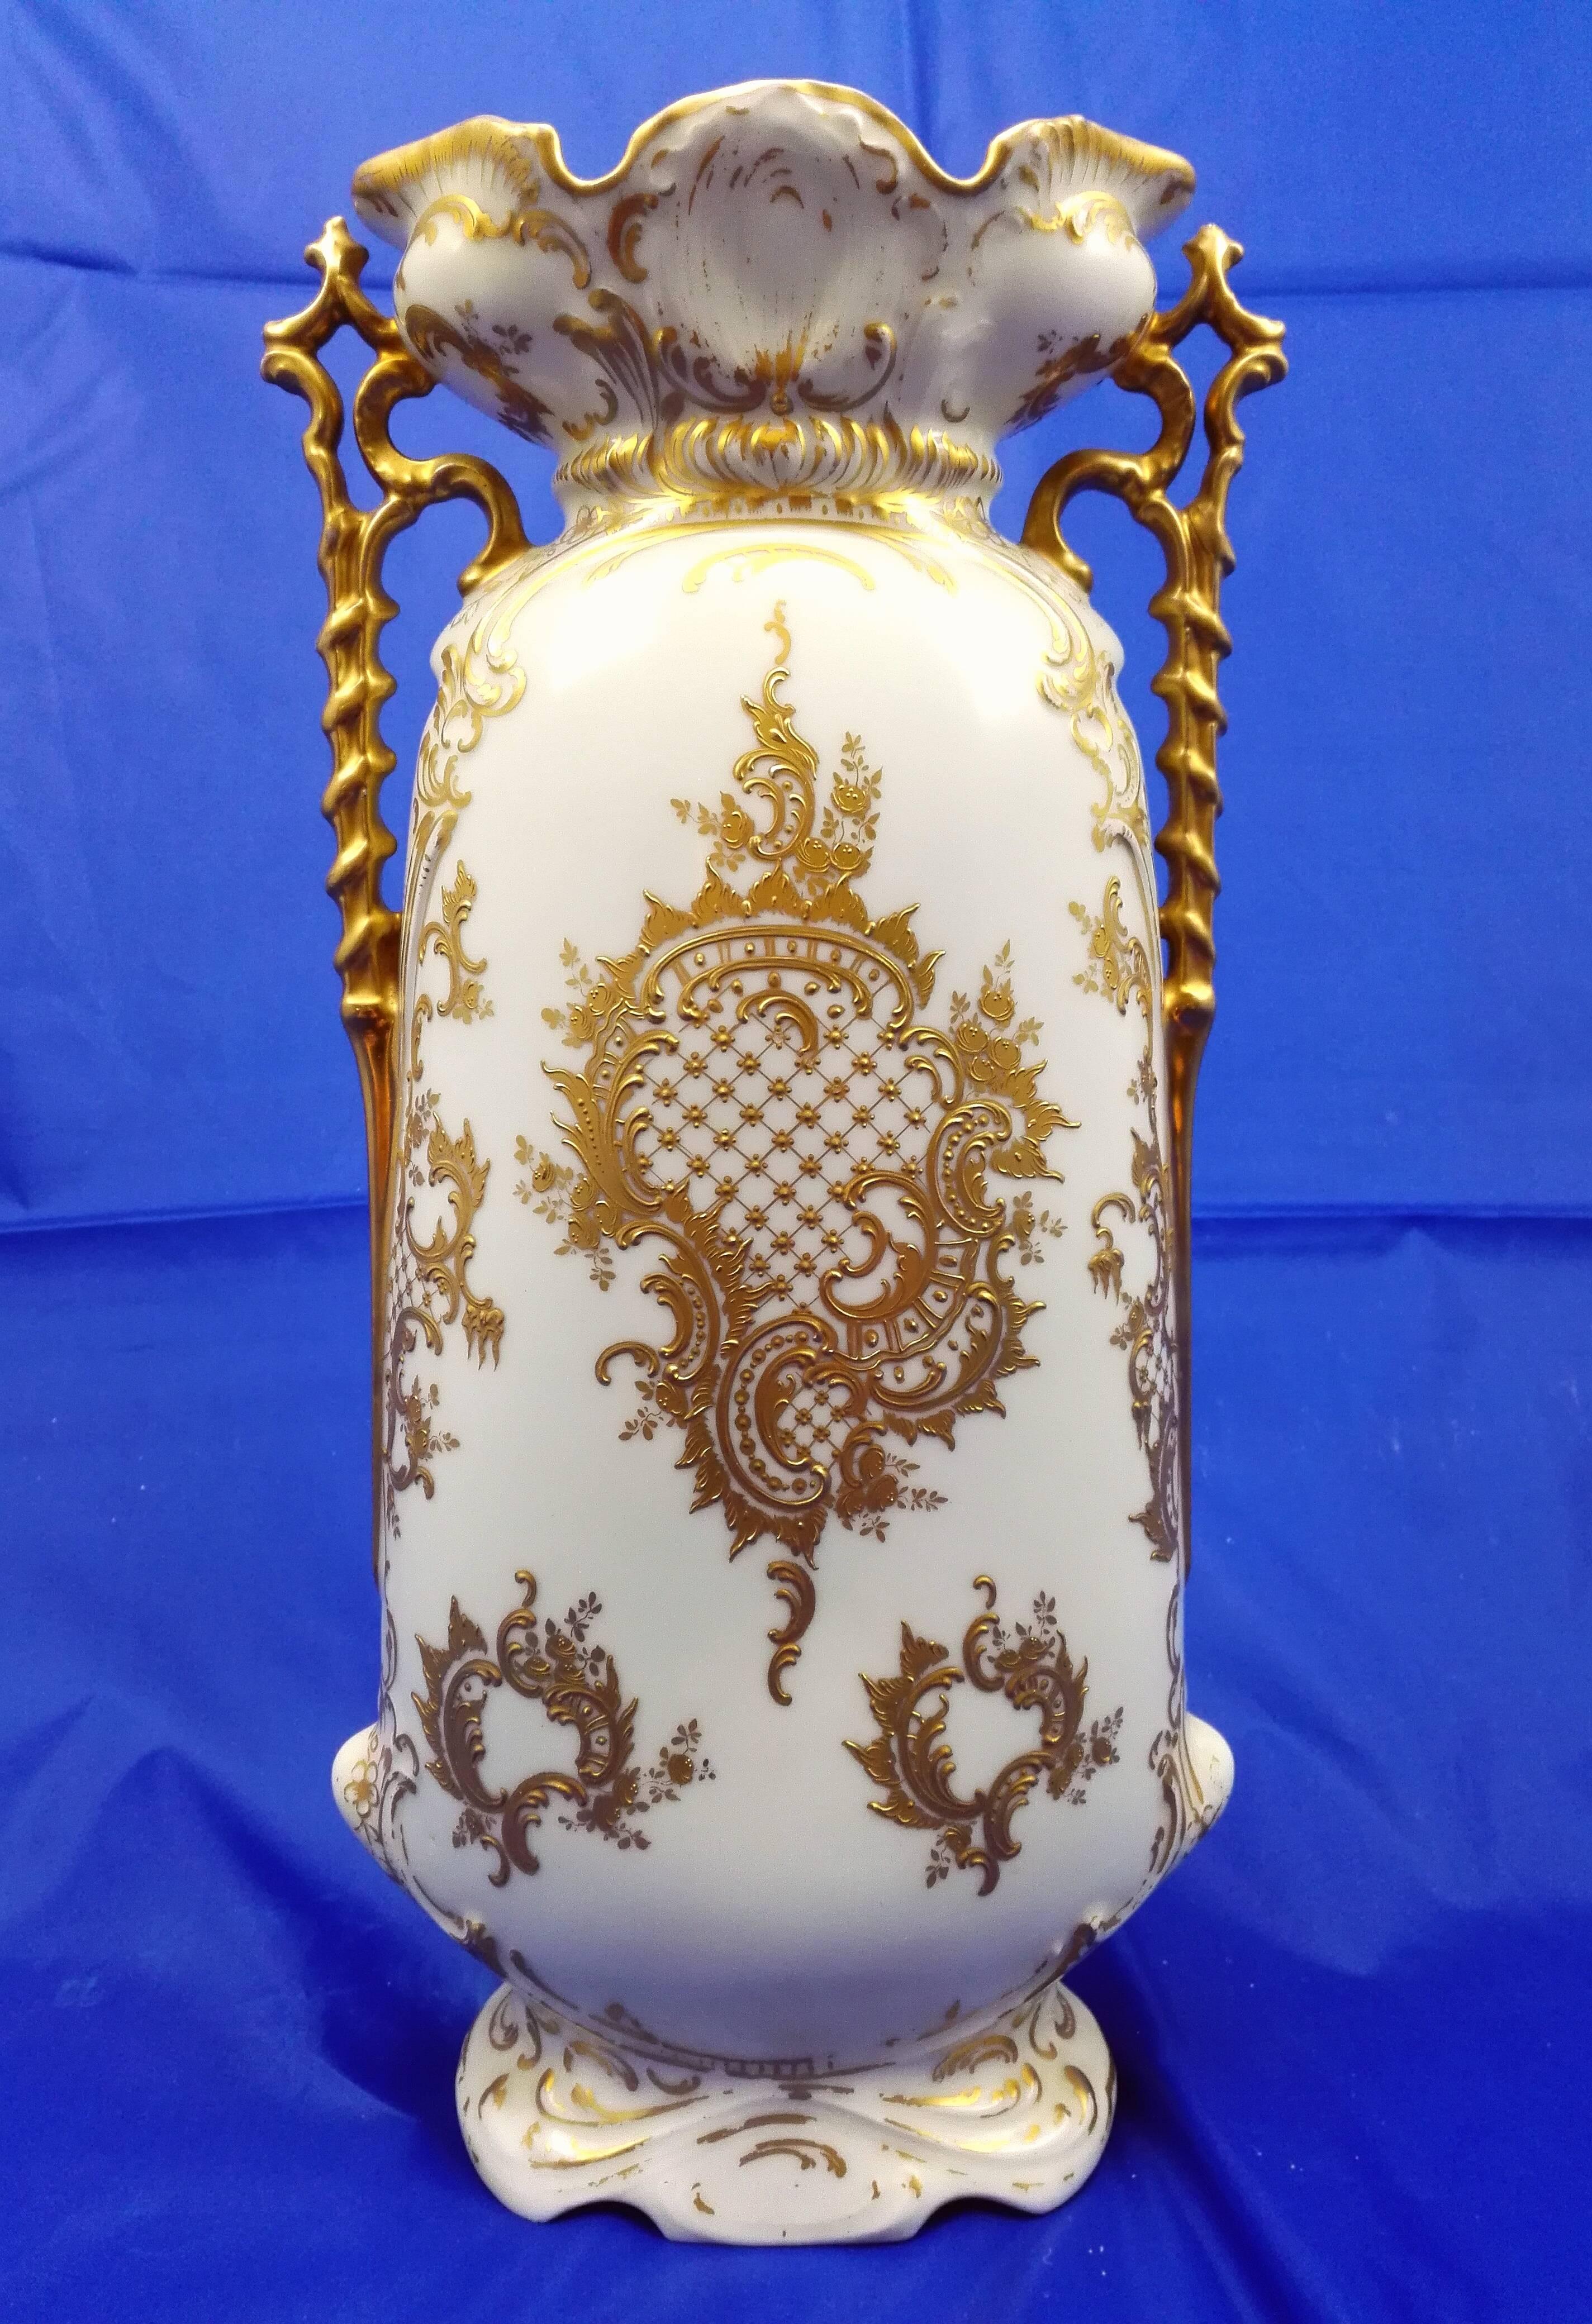 Original old Vienna porcelain vase, figurative painted and fine gilded. Marked under the bodden with the so called 